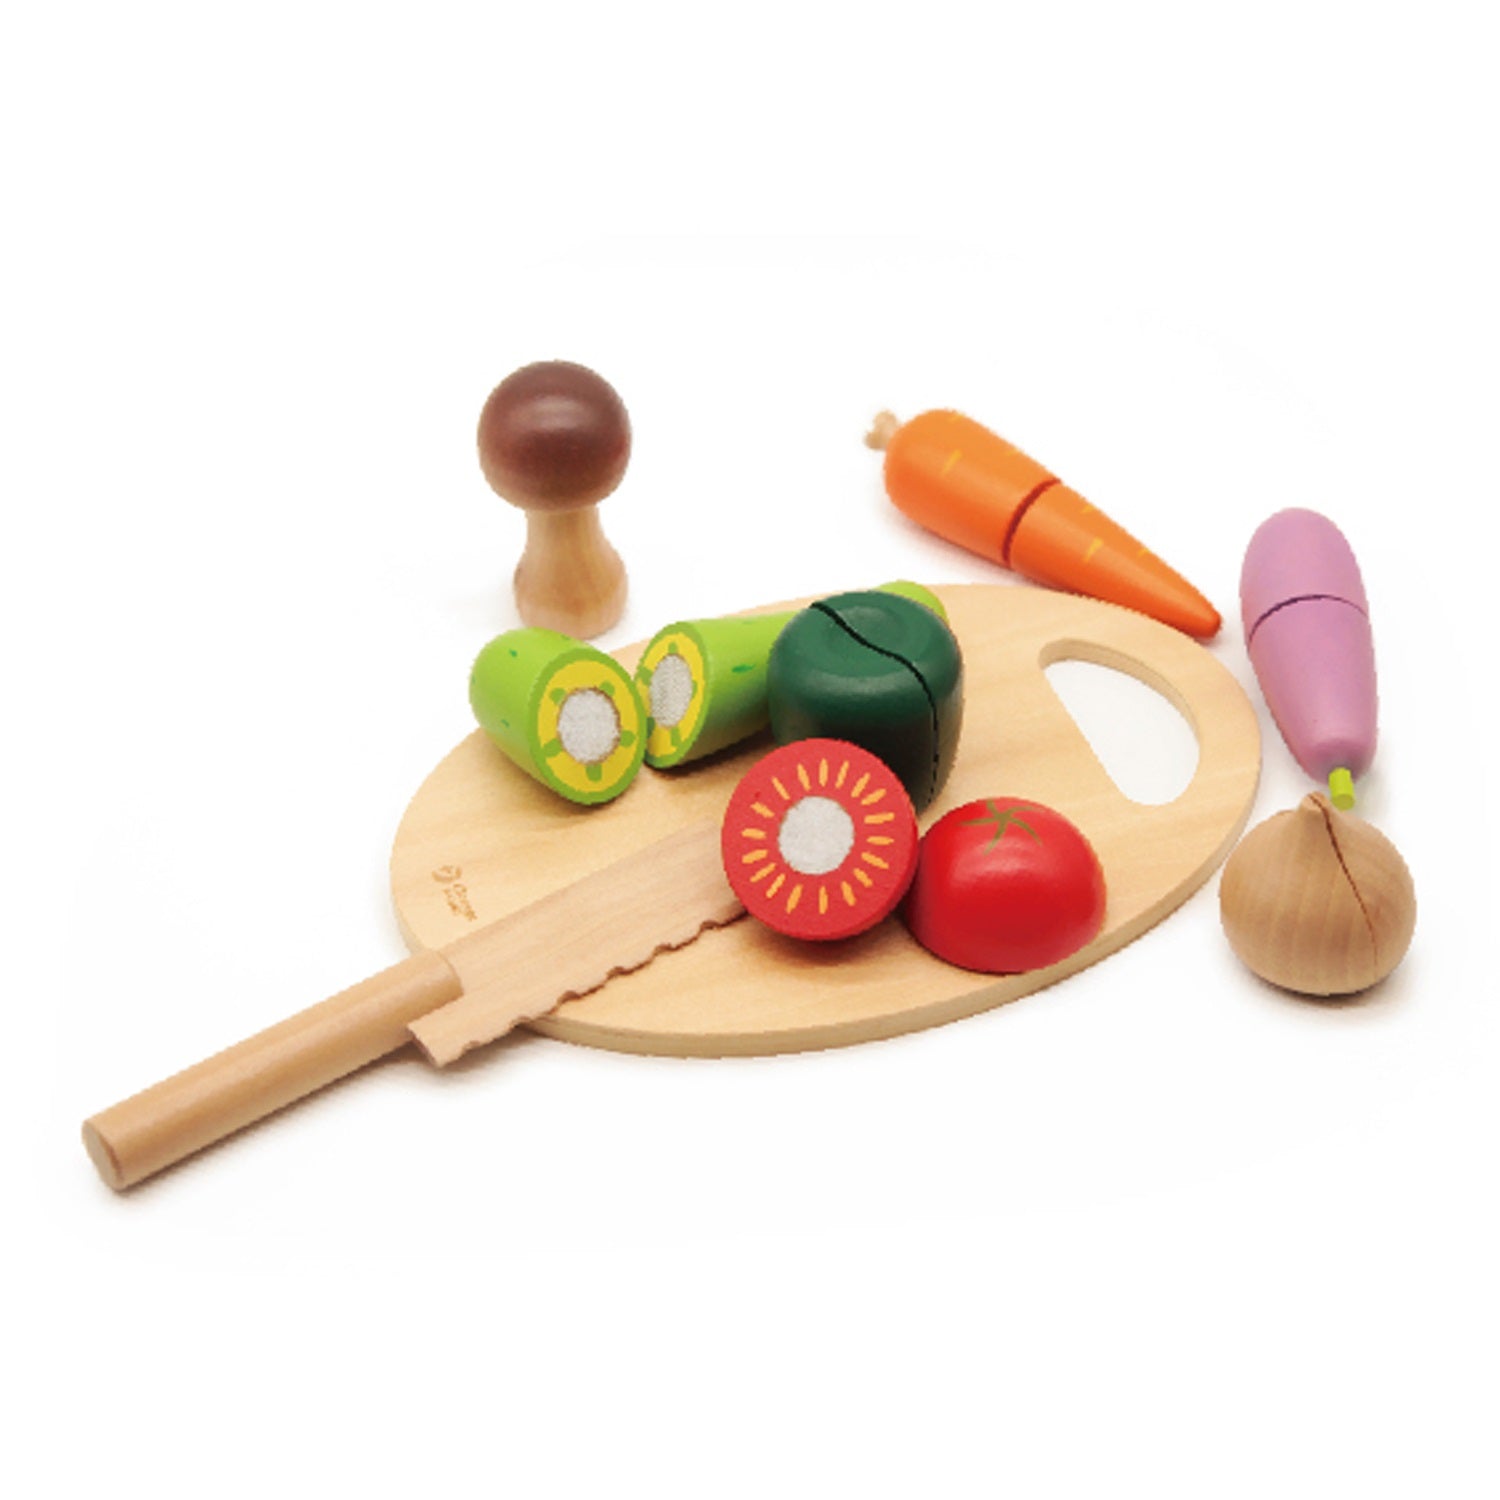 The Classic World cutting veg set will help children to identify and recognise different vegetables and practice their motor skills.